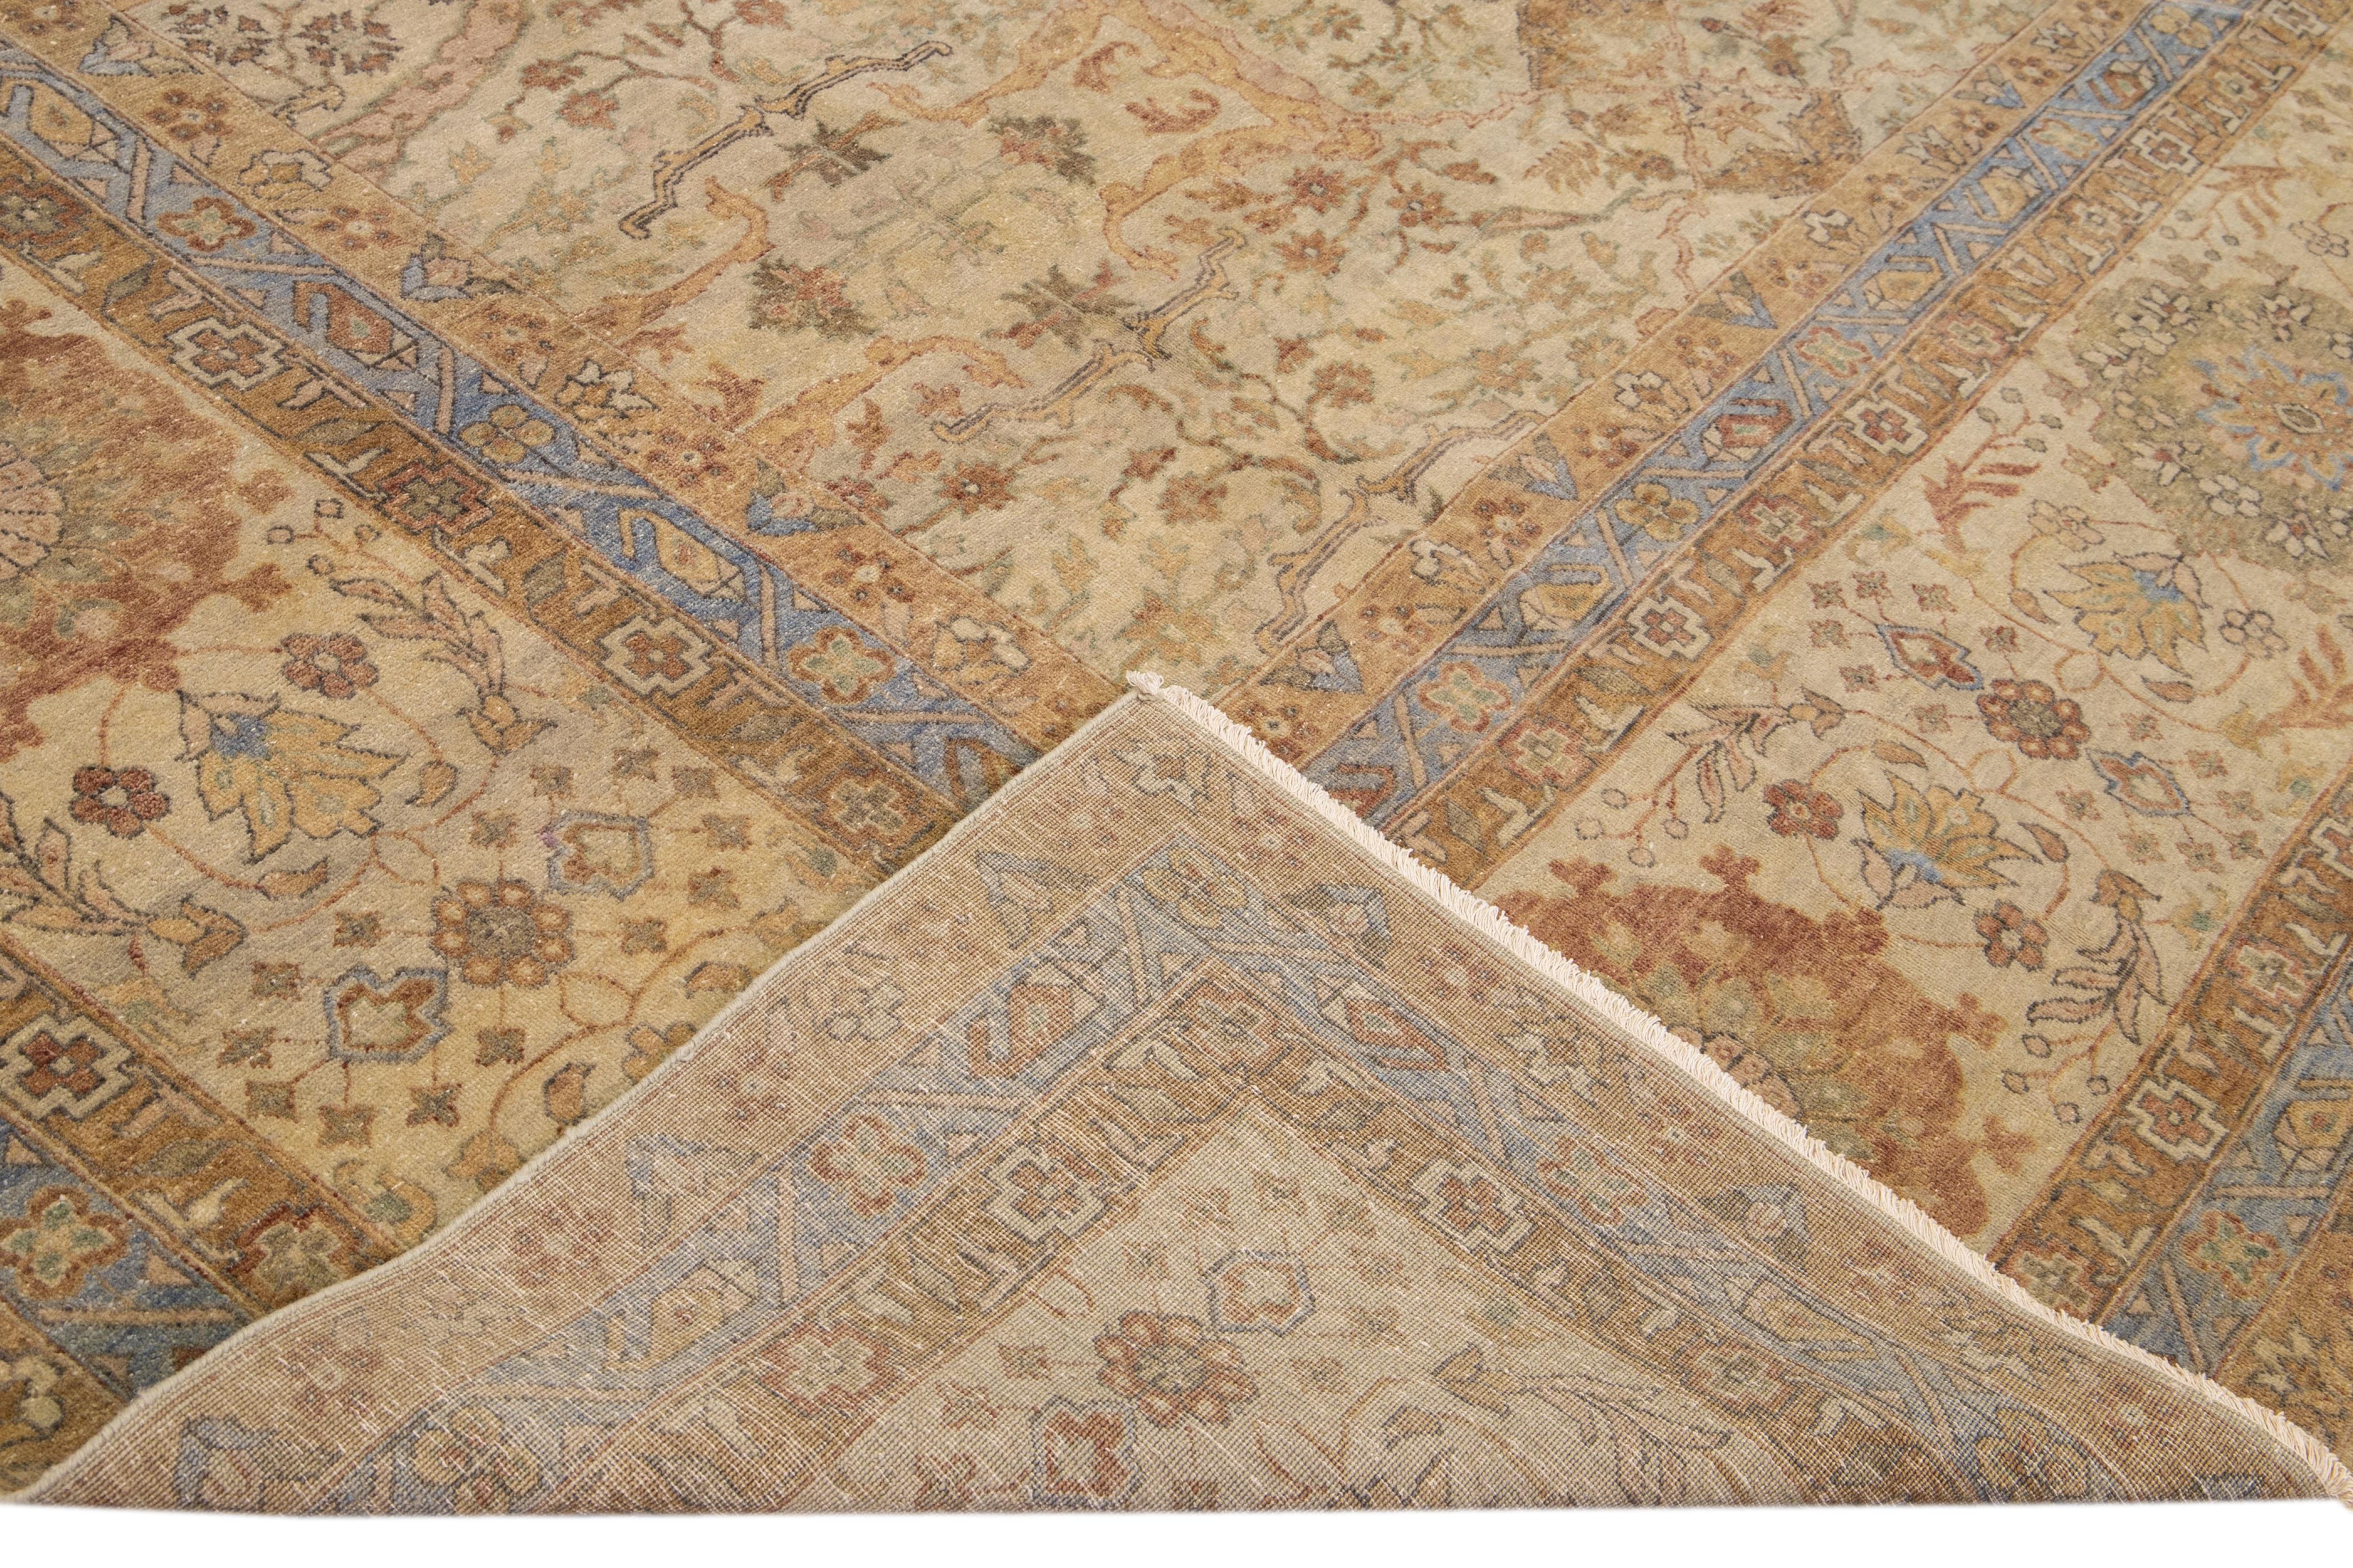 Beautiful modern Indian hand-knotted wool rug with a beige field. This modern rug has tan and blue accents gorgeous all-over geometric floral pattern design.

This rug measures: 11'8